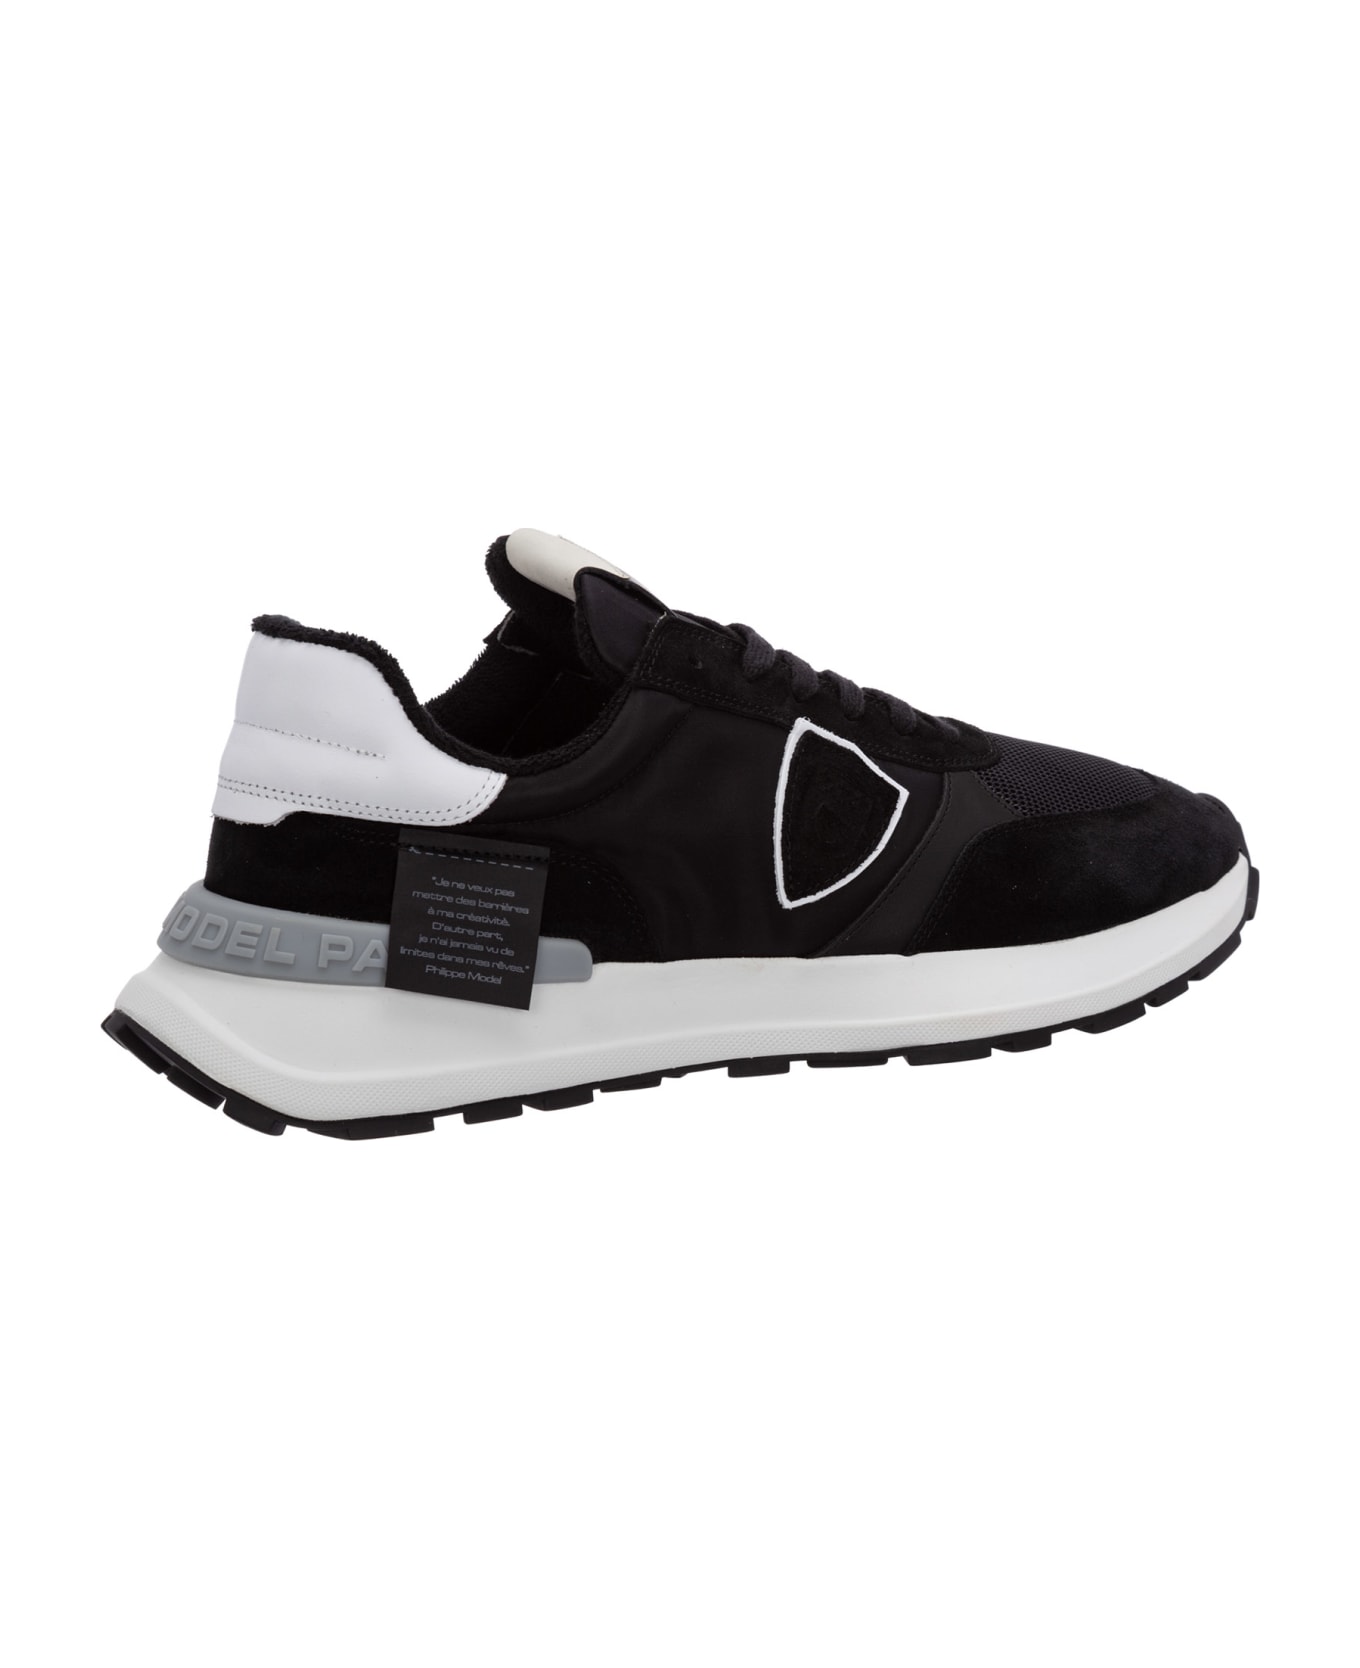 Philippe Model Antibes Leather Sneakers - Noir